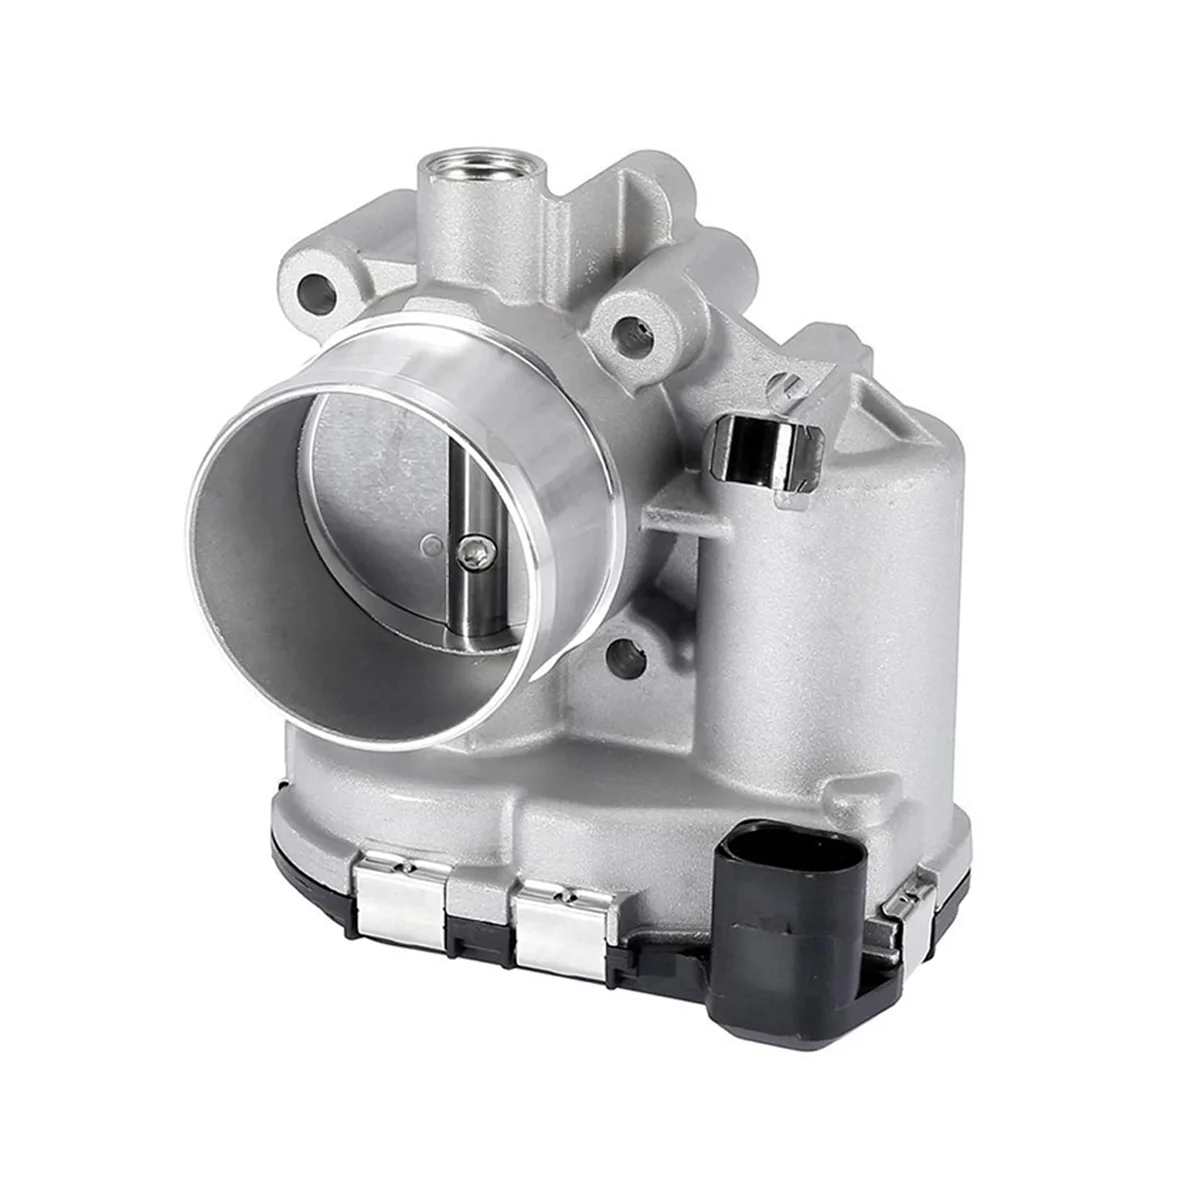 

7S7G9F991CA Throttle Body Throttle Valve Automobile for Ford Fiesta Escape Transit Connect